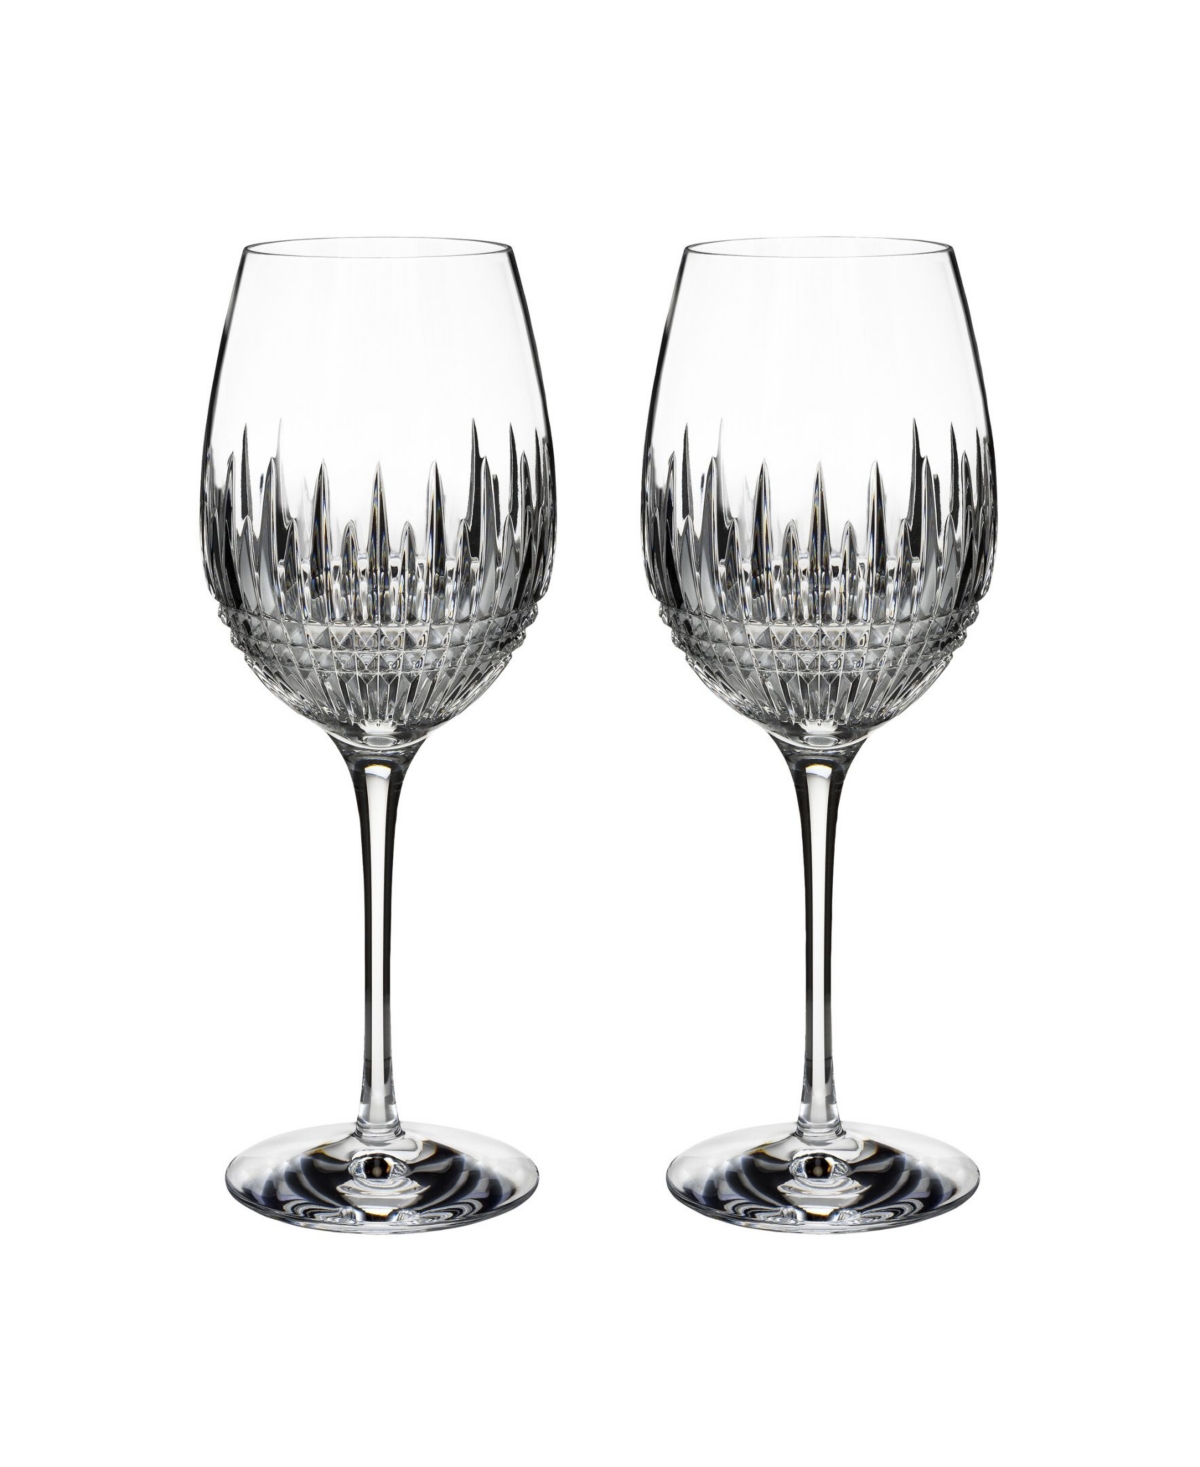 Waterford Lismore Diamond Essence Goblet 19 Oz, Set Of 2 In Clear